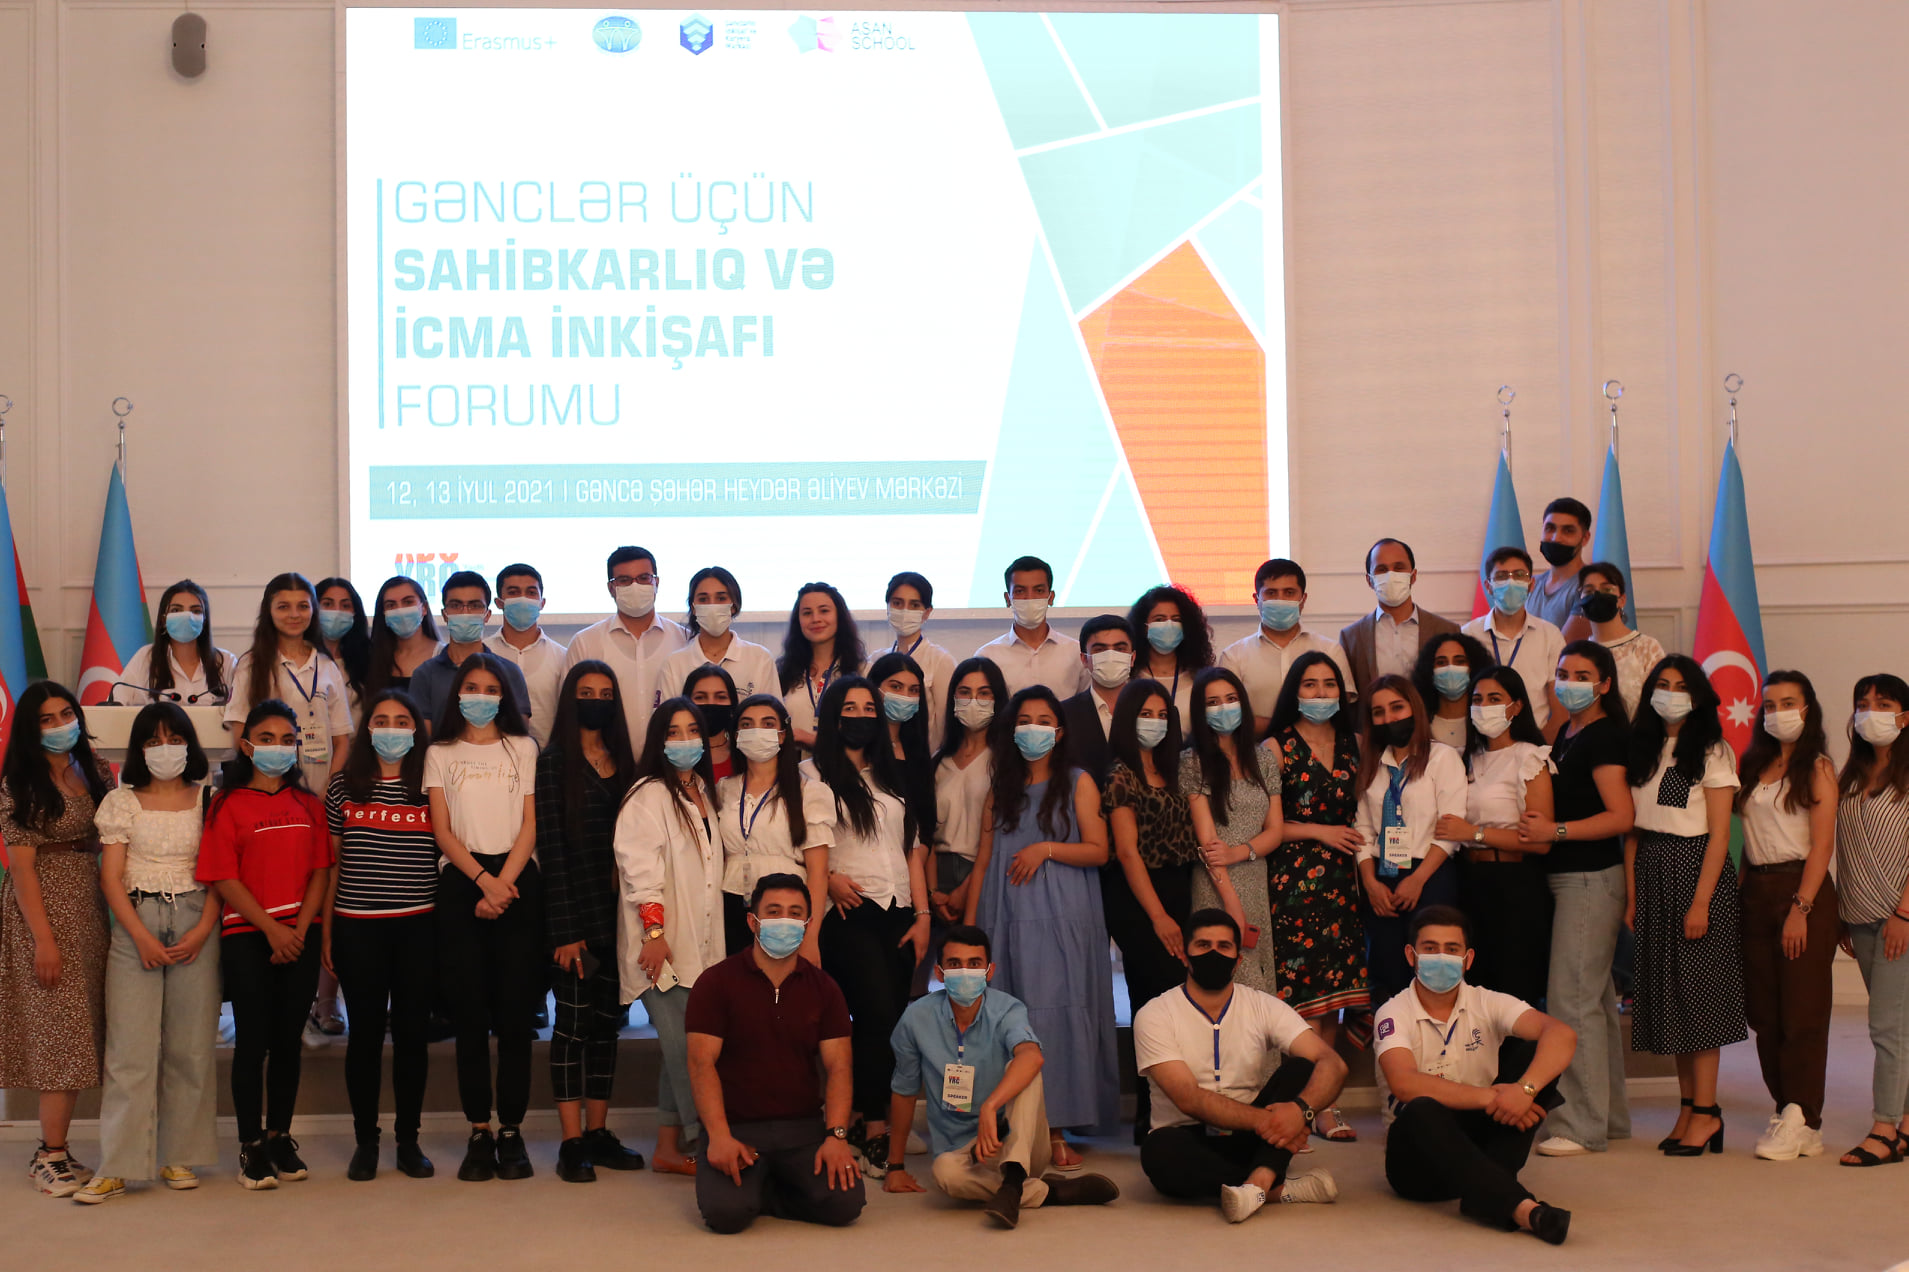 The Youth Forum on Entrepreneurship and Community Development was held in Ganja.